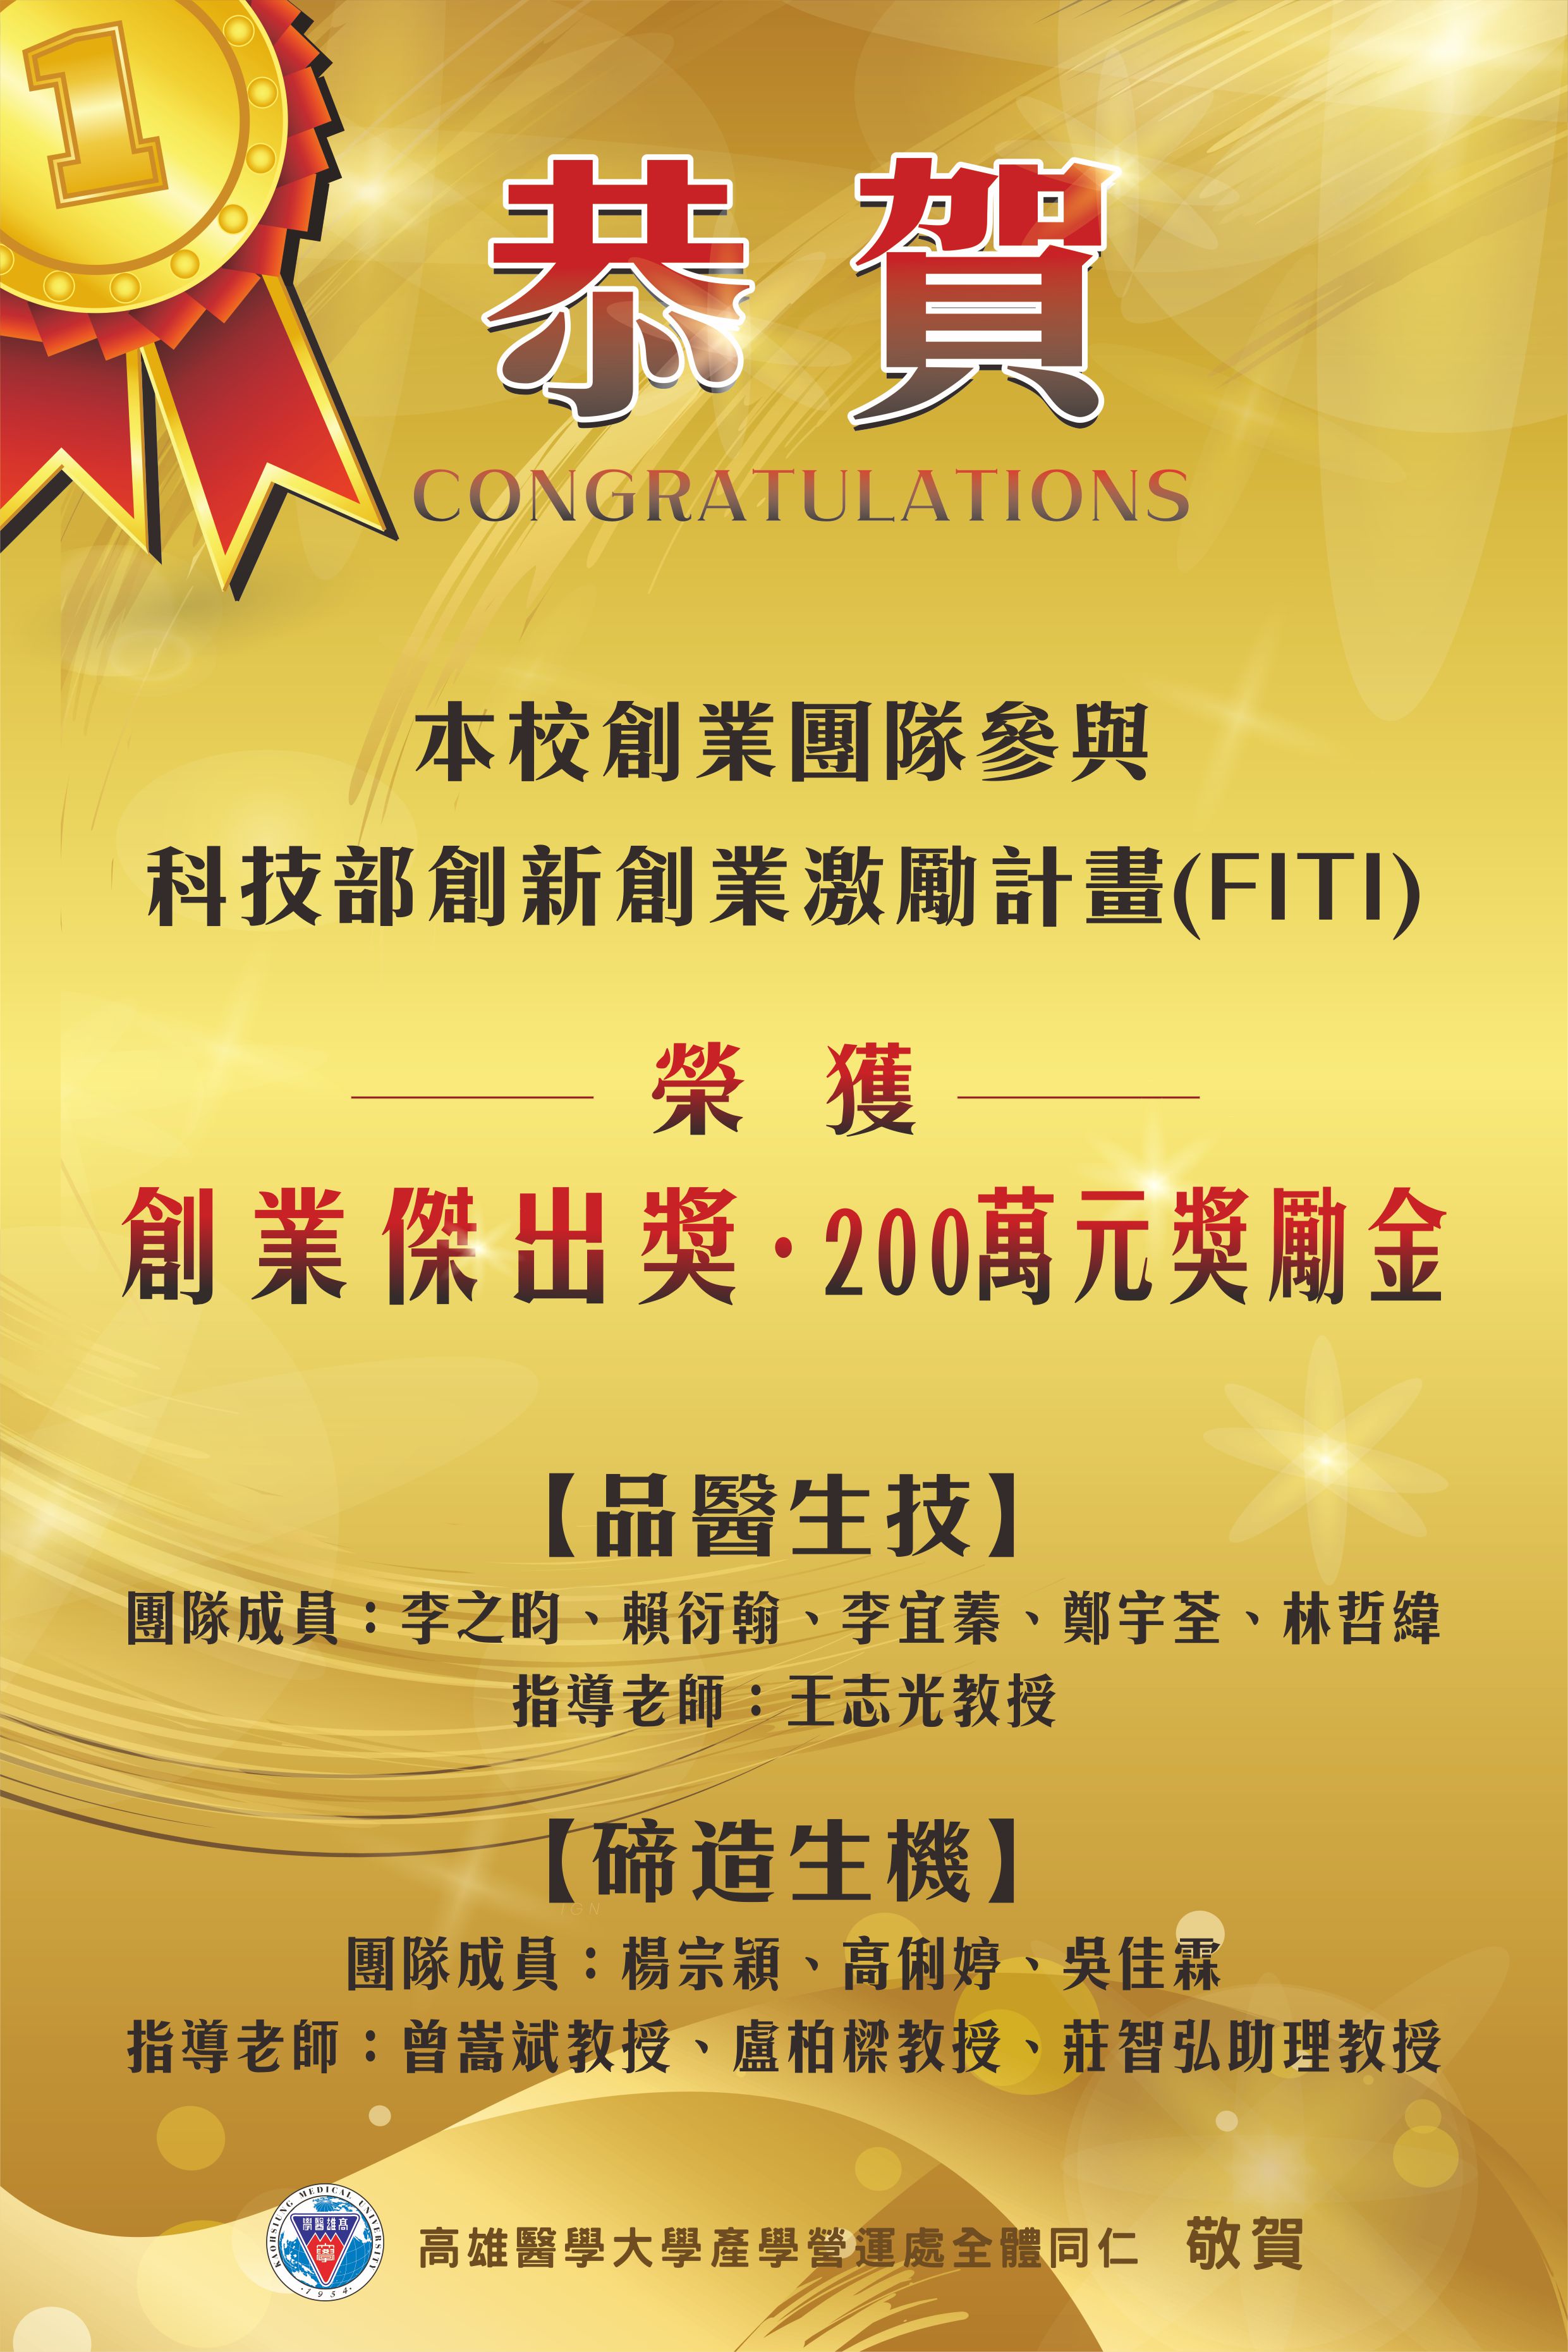 Congratulation 2 KMU Startup teams obtained glory of TOP 1 from MOST FITI Programjpg